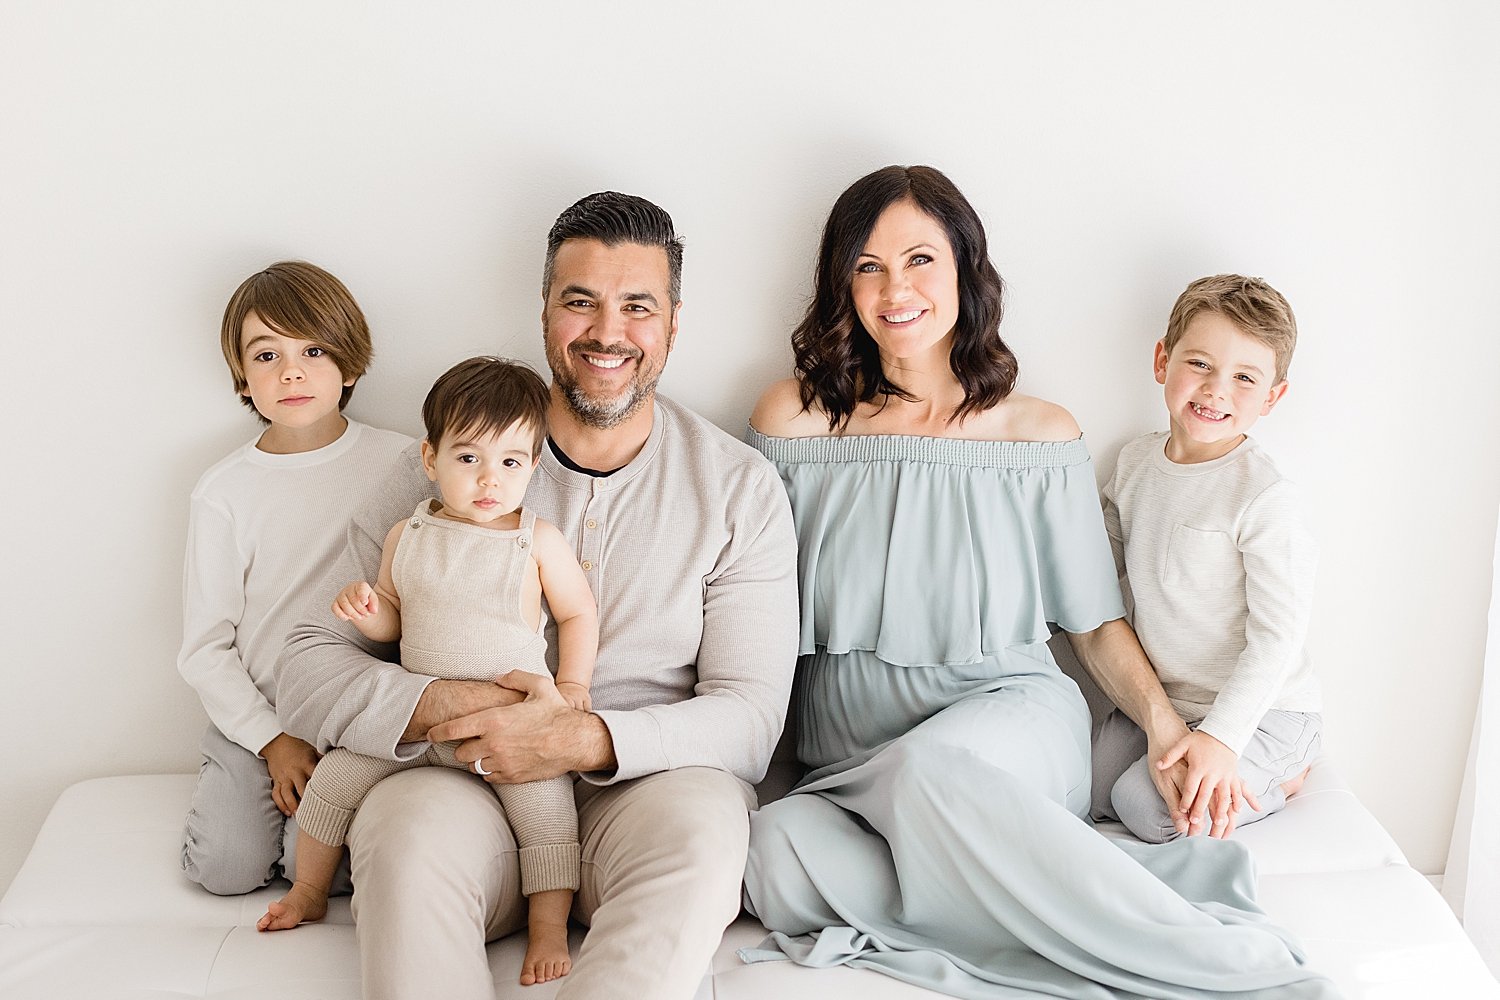 Family portrait to celebrate youngest son turning one | Ambre Williams Photography